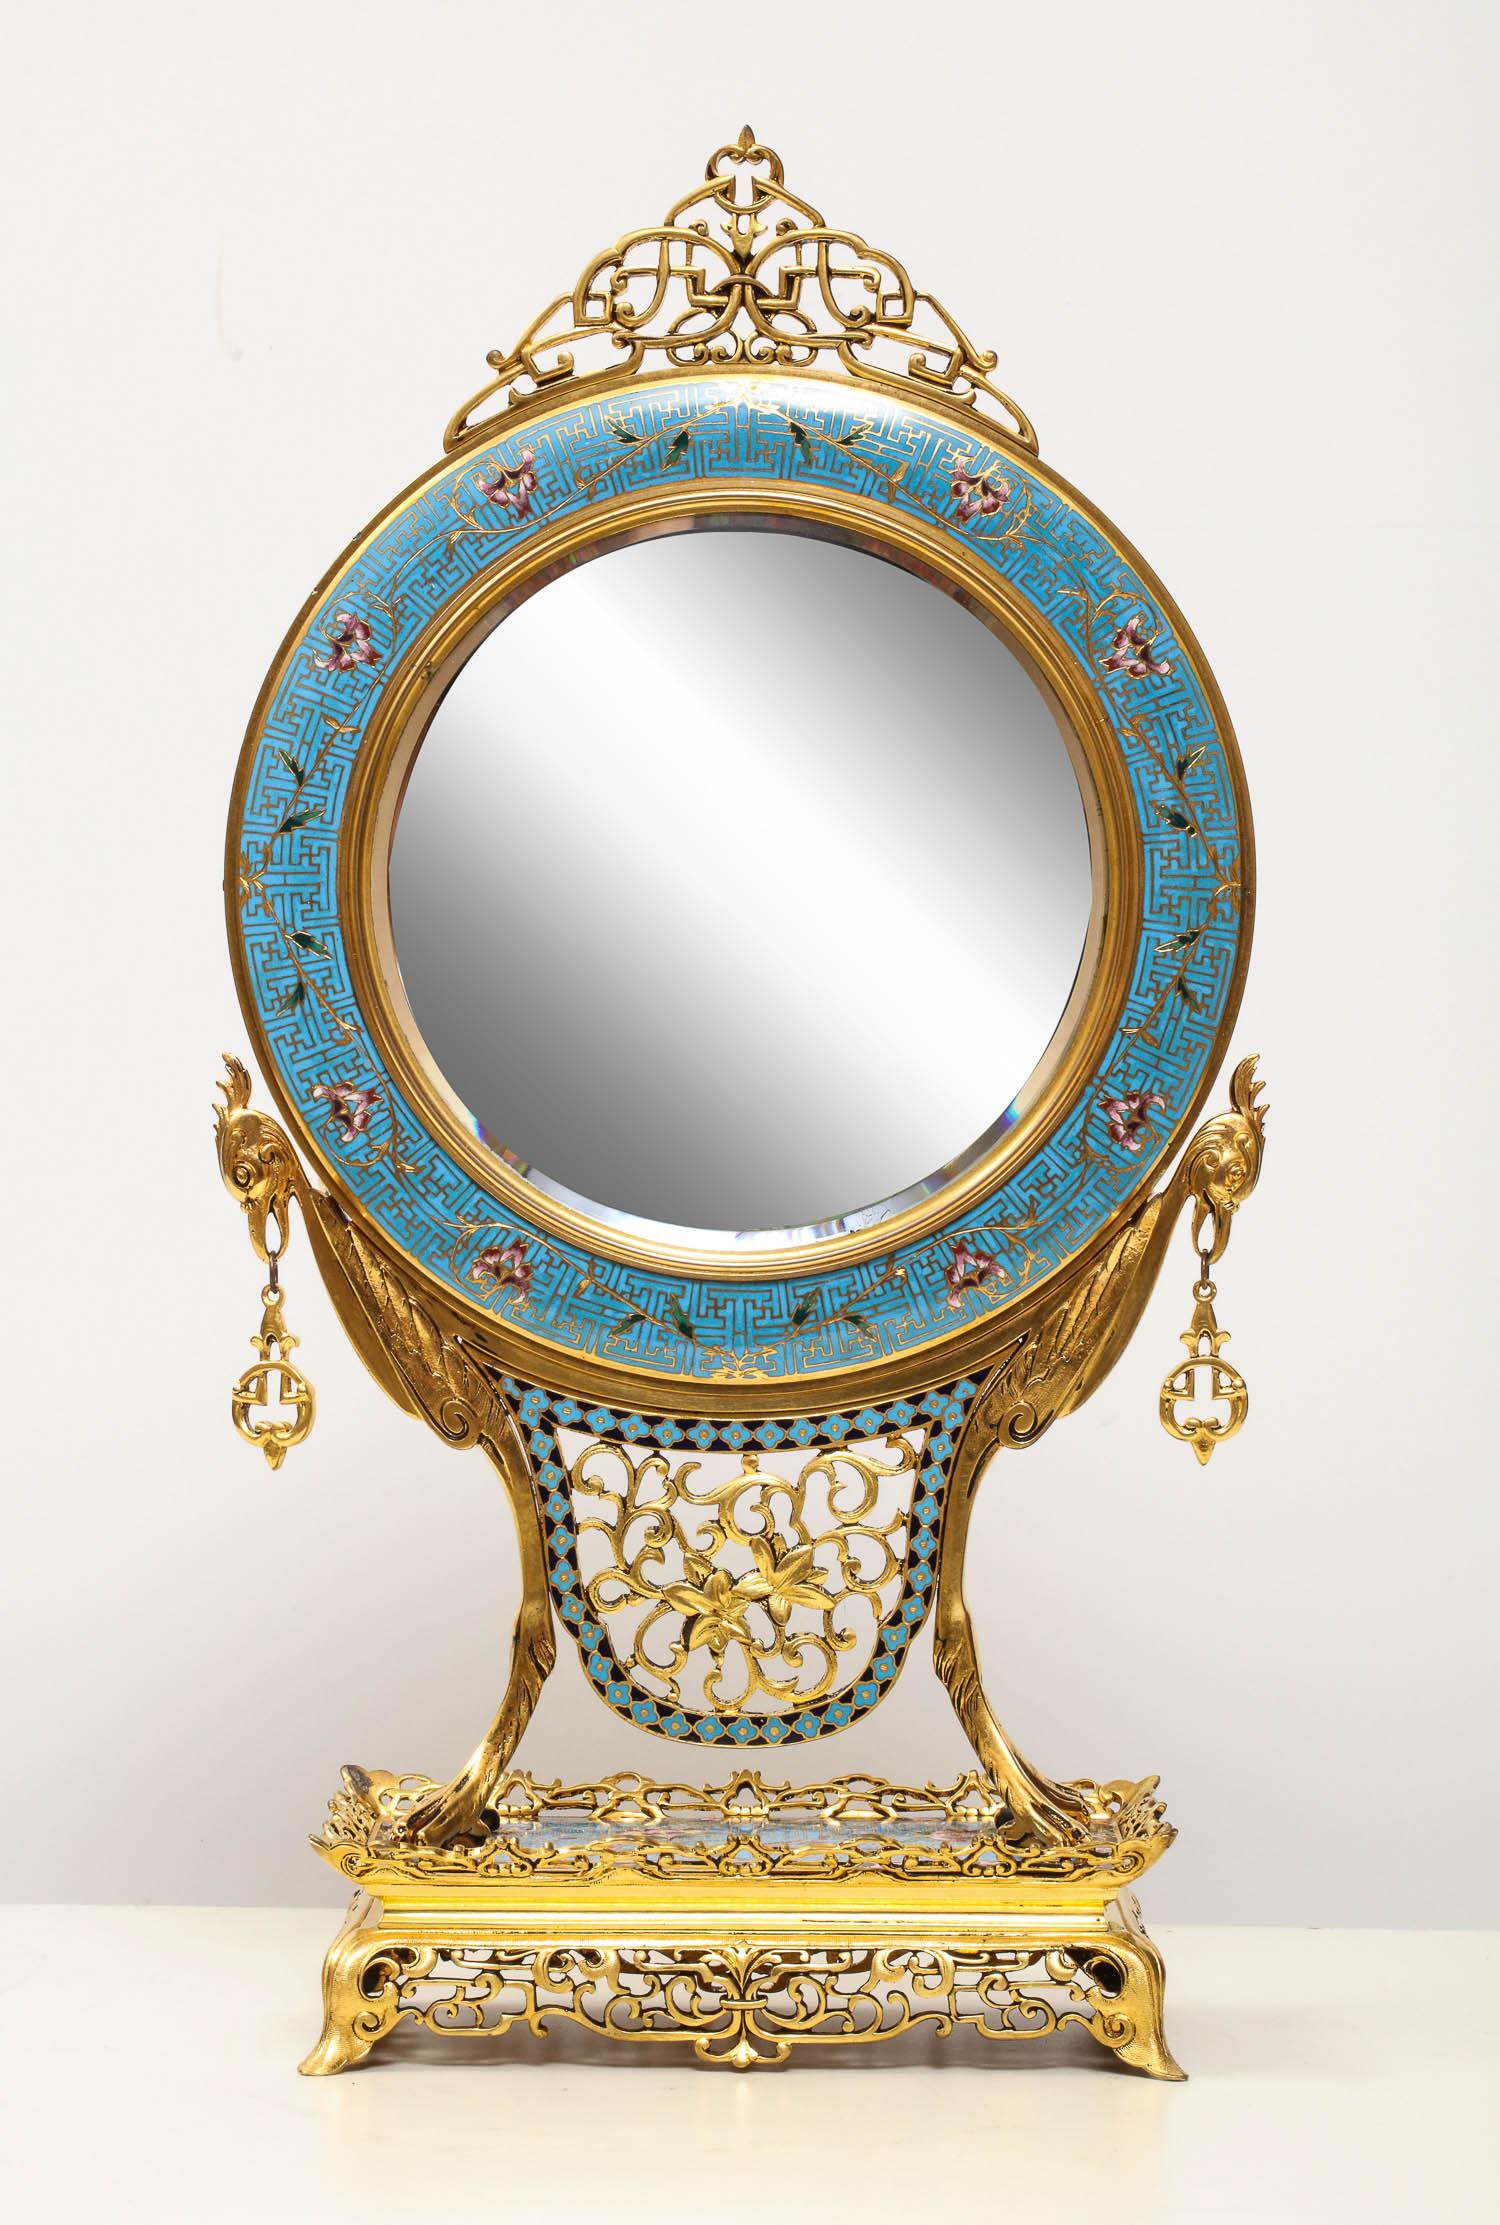 A French Japonisme Ormolu / Bronze and Champleve Cloisonne Enamel Vanity Mirror

attributed to Edouard Lievre, circa 1880

The circular bevelled mirror supported by a pair of birds, on a pierced rectangular base.

Very high